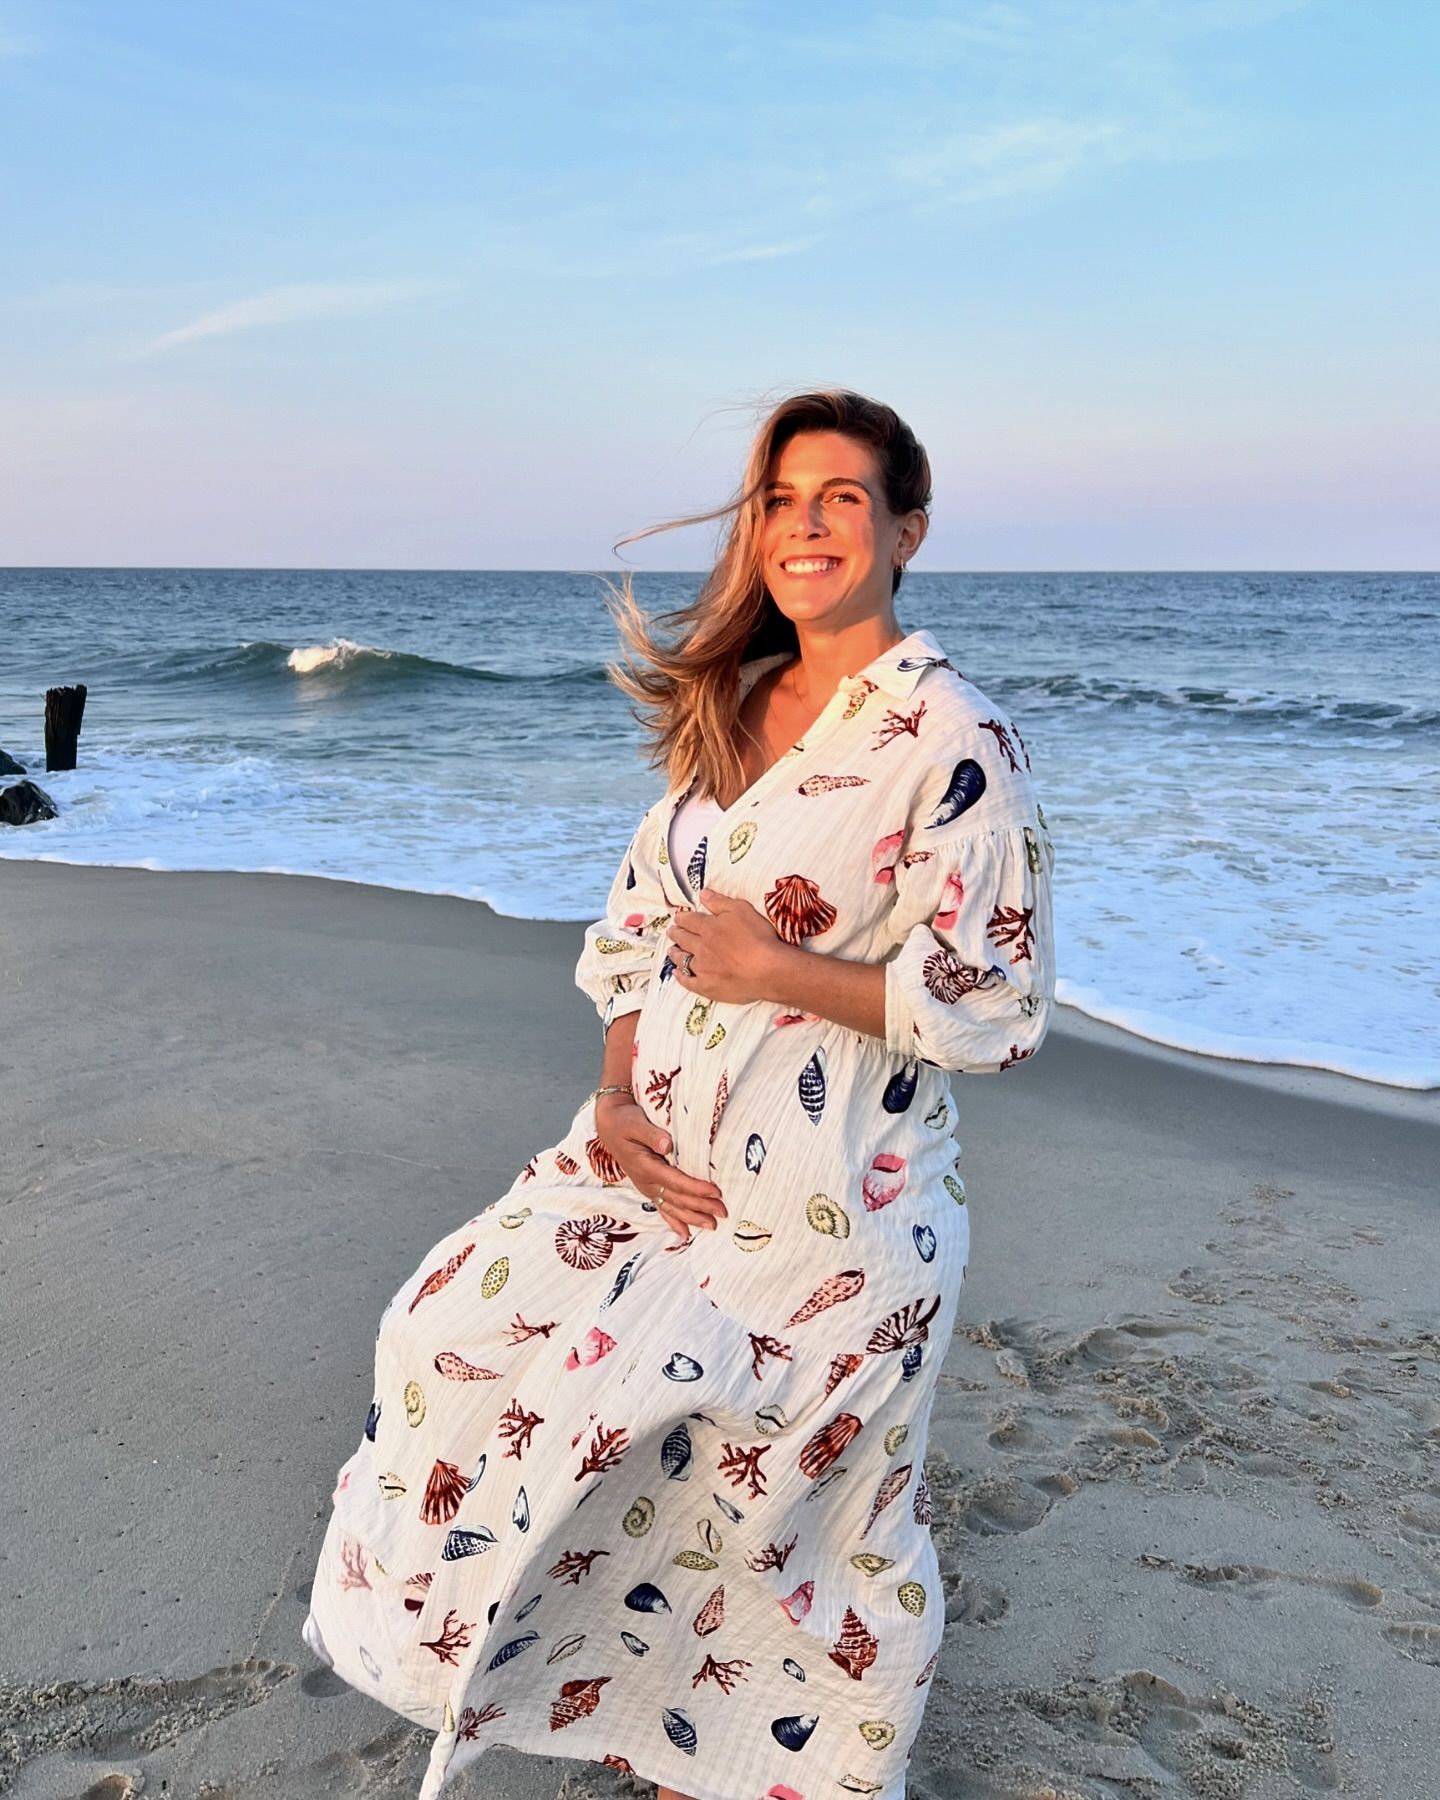 Theresa Nist's daughter Jen announced her pregnancy with a beach photoshoot